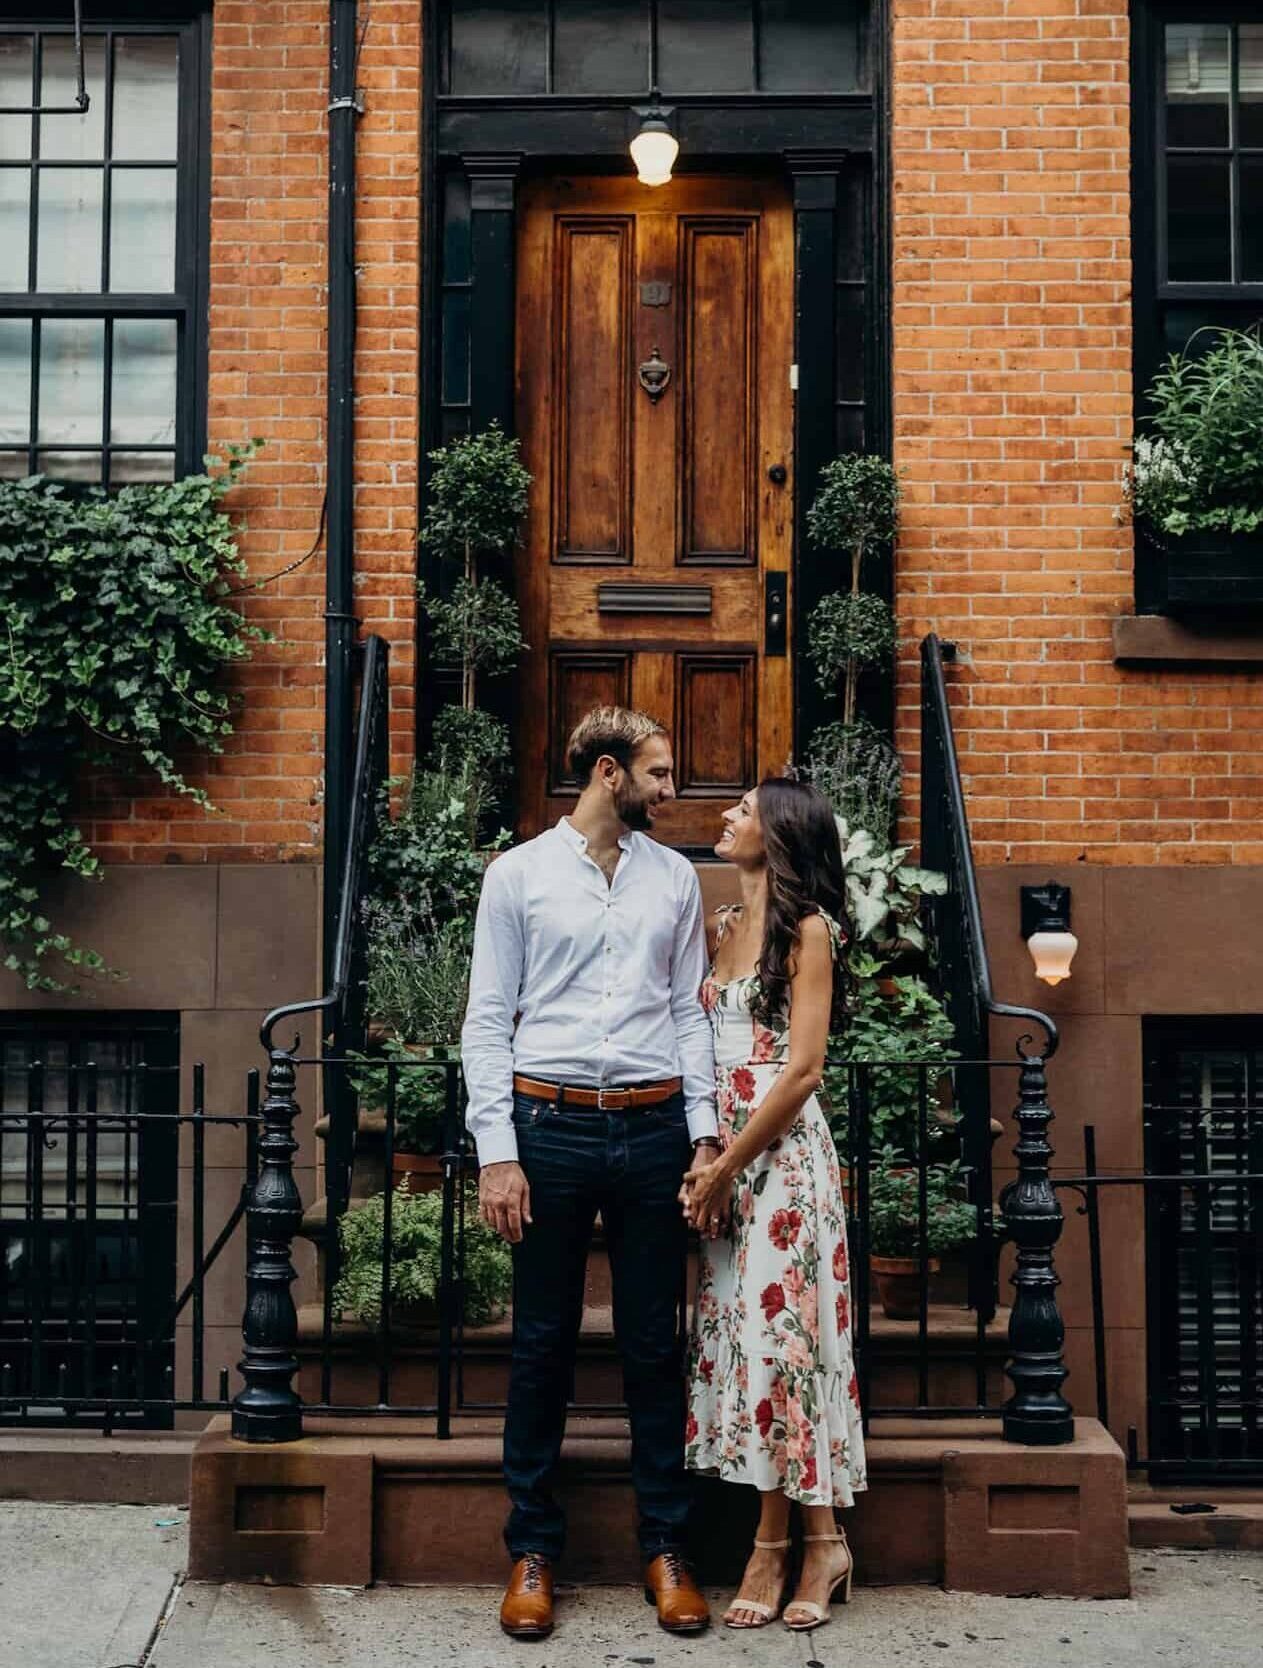 Young man and young woman look at each other lovingly in front of city home.